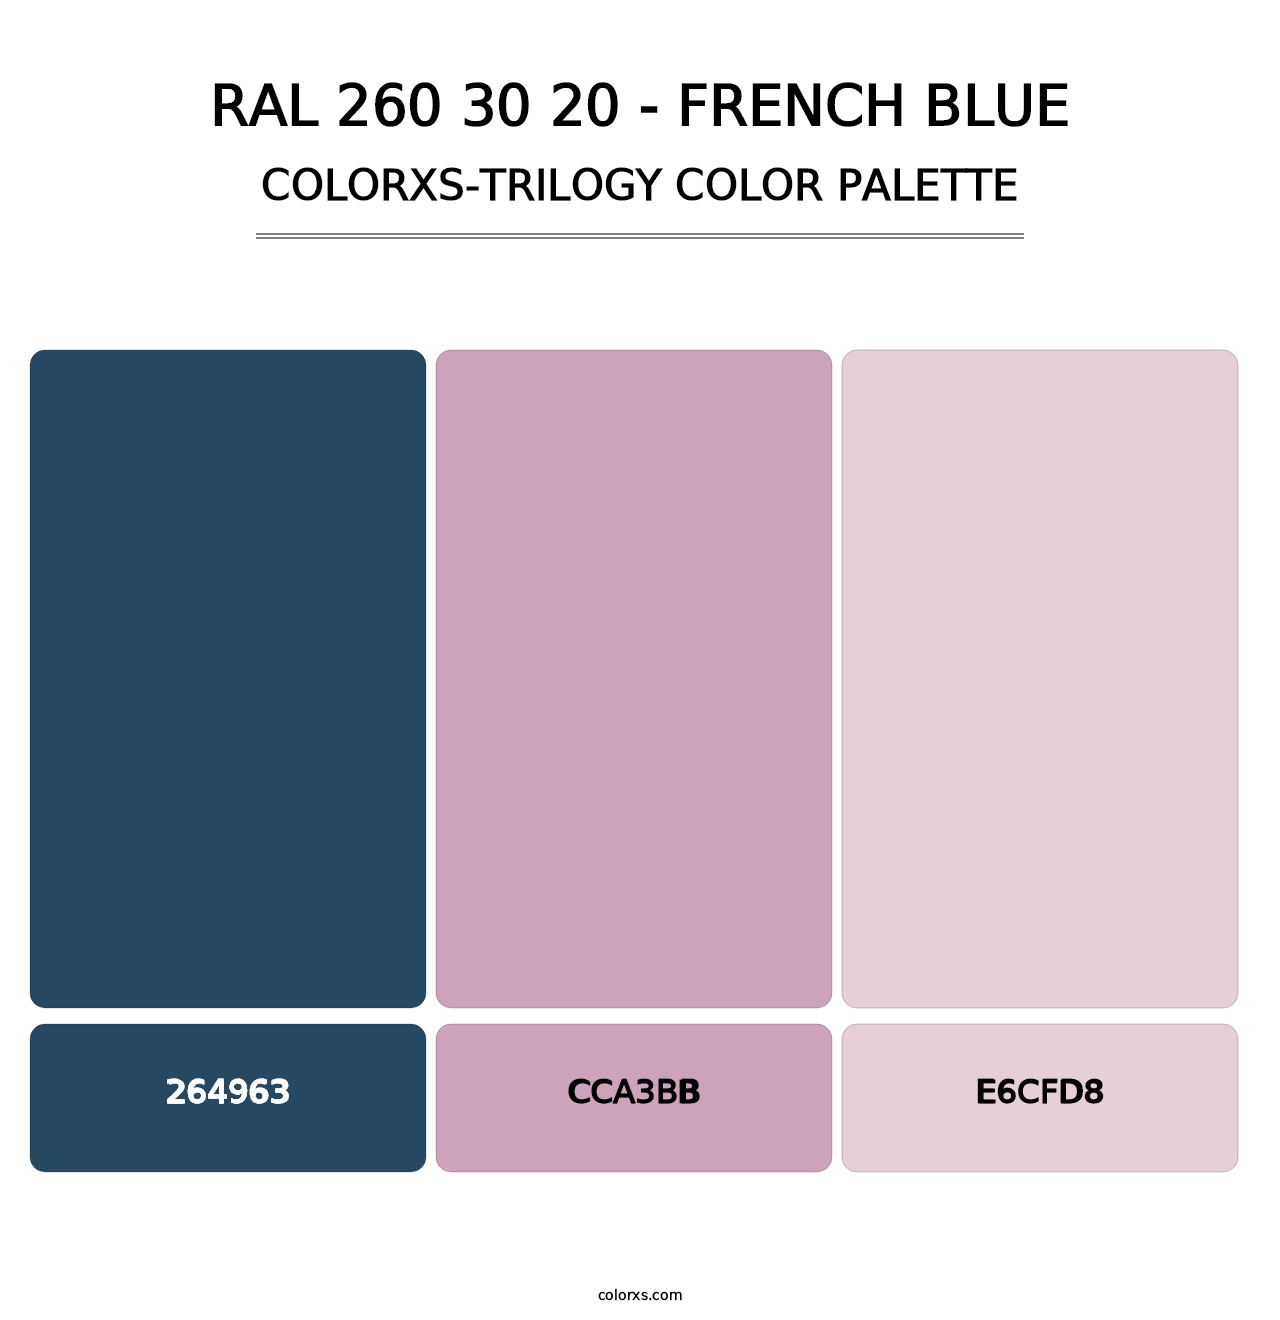 RAL 260 30 20 - French Blue - Colorxs Trilogy Palette